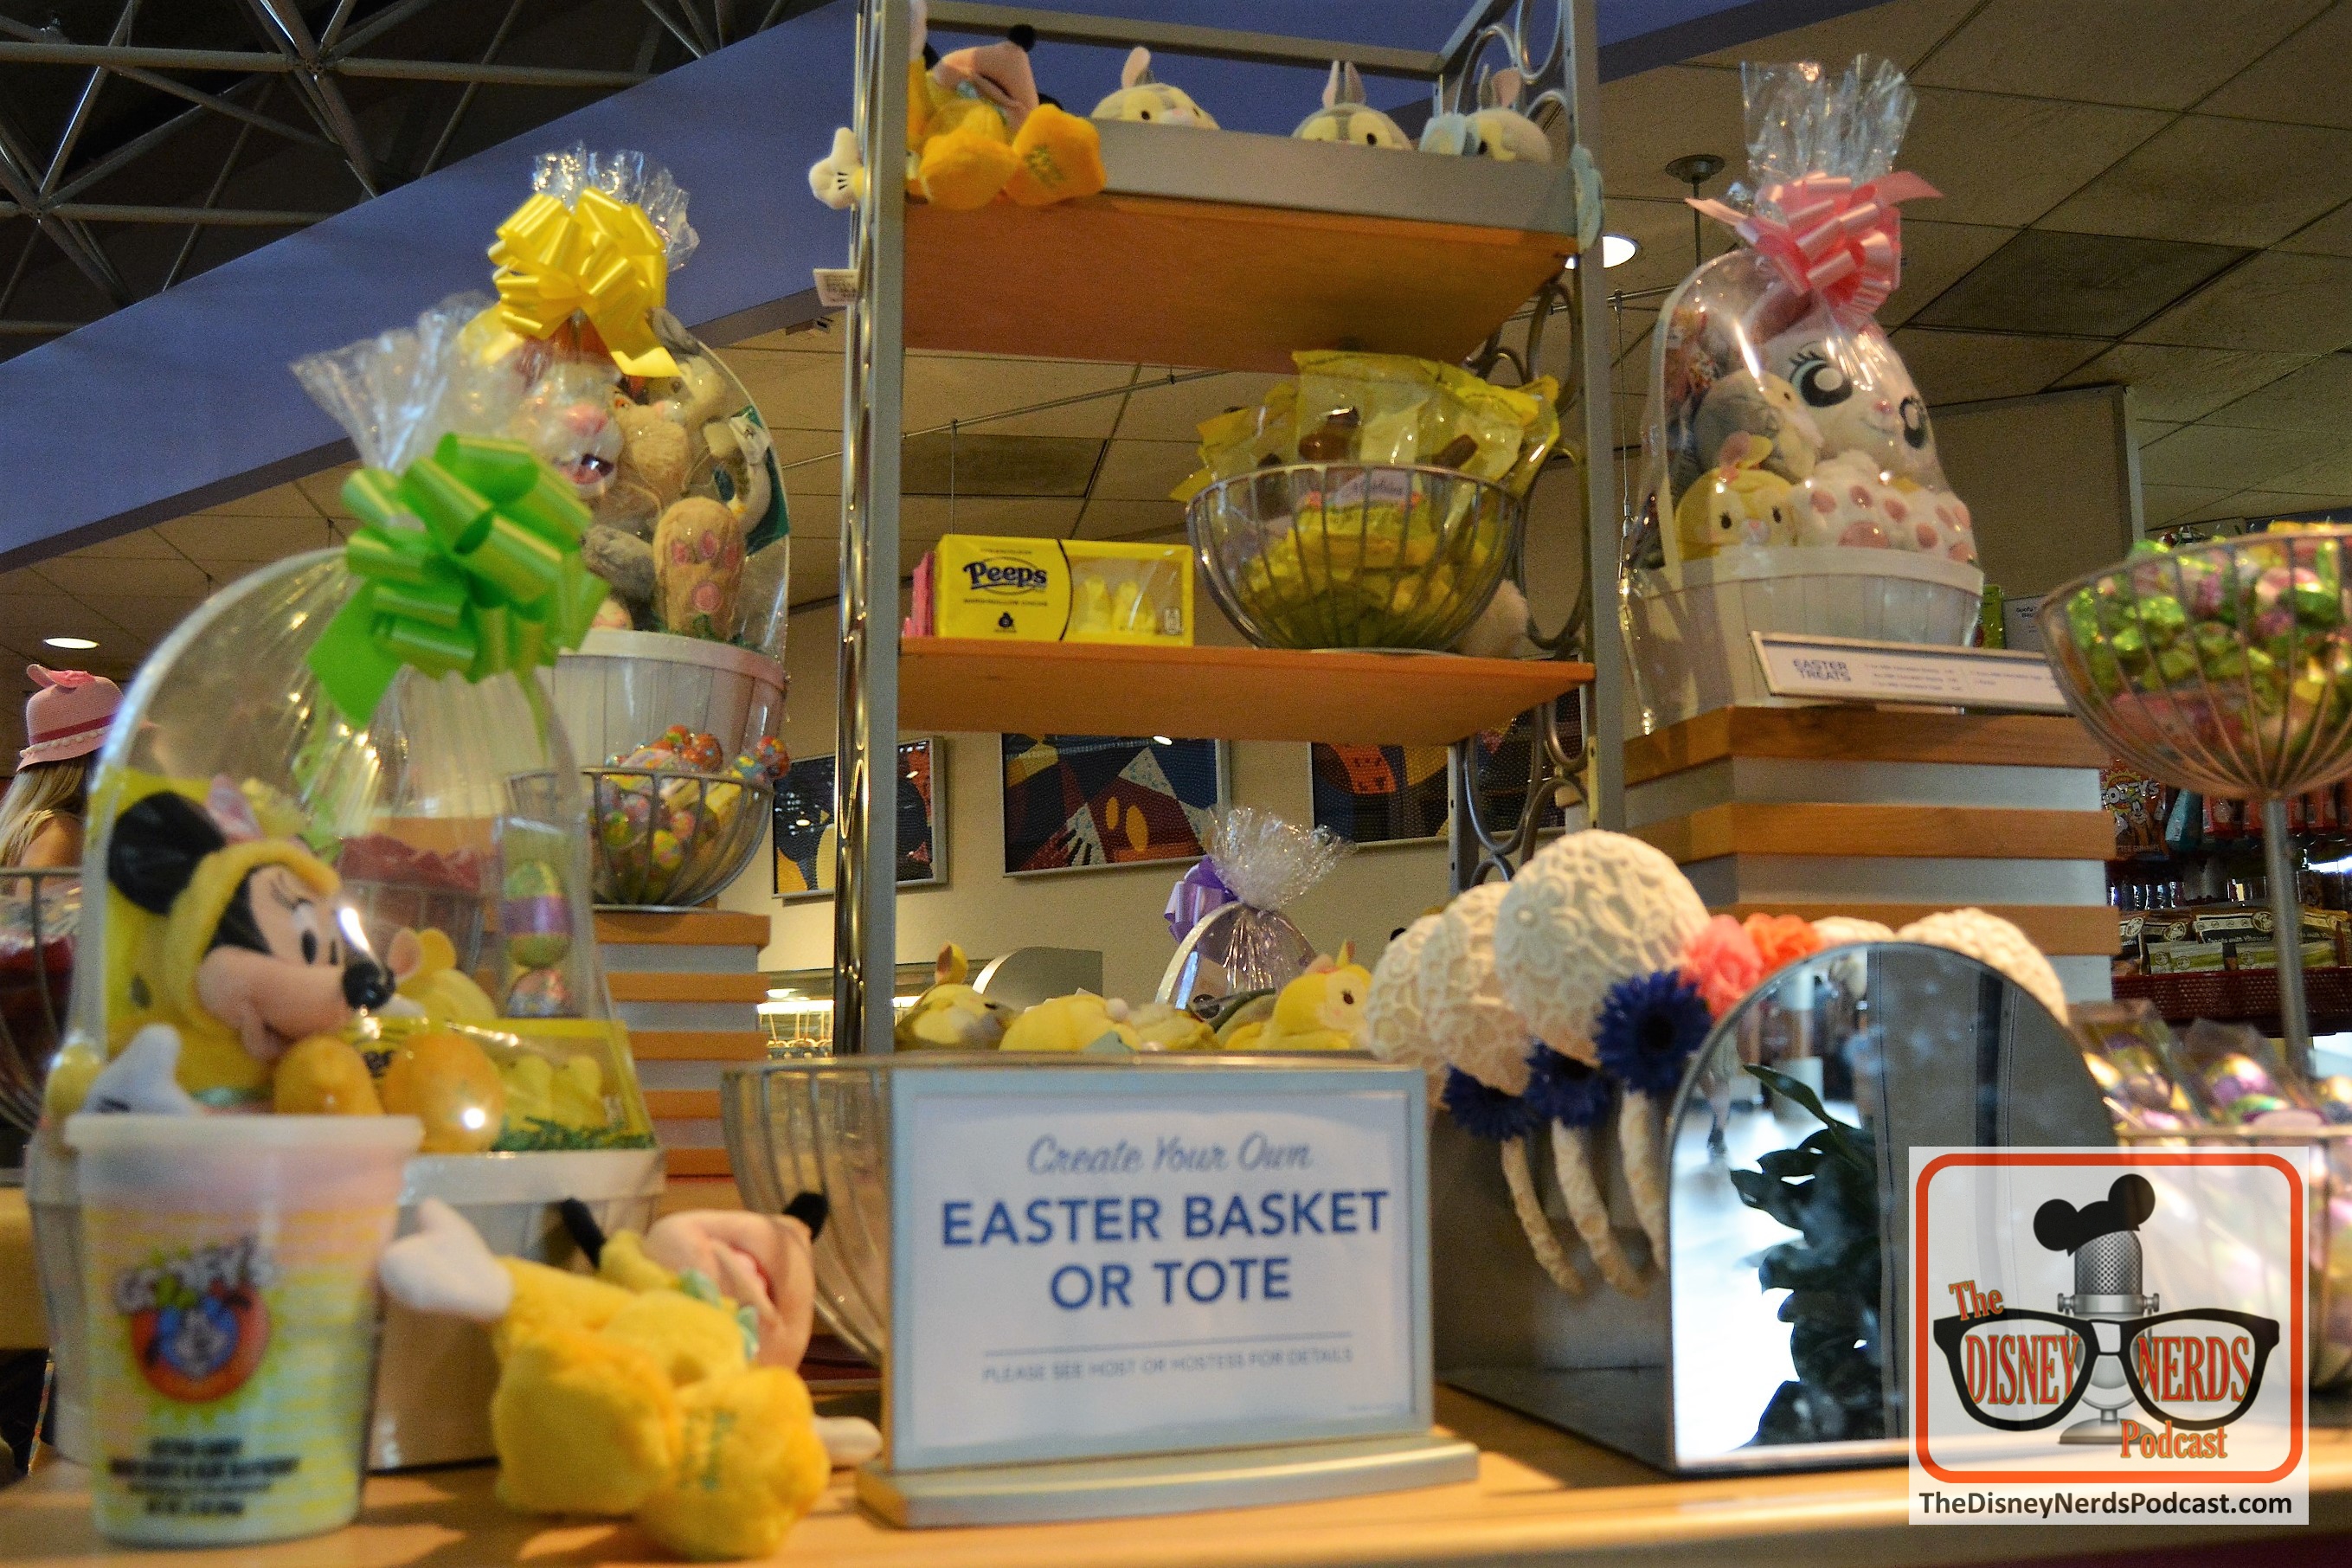 All around Walt Disney World Parks and Resorts you can create your own custom Easter Basket or Tote - This Display with examples at the contemporary resort.